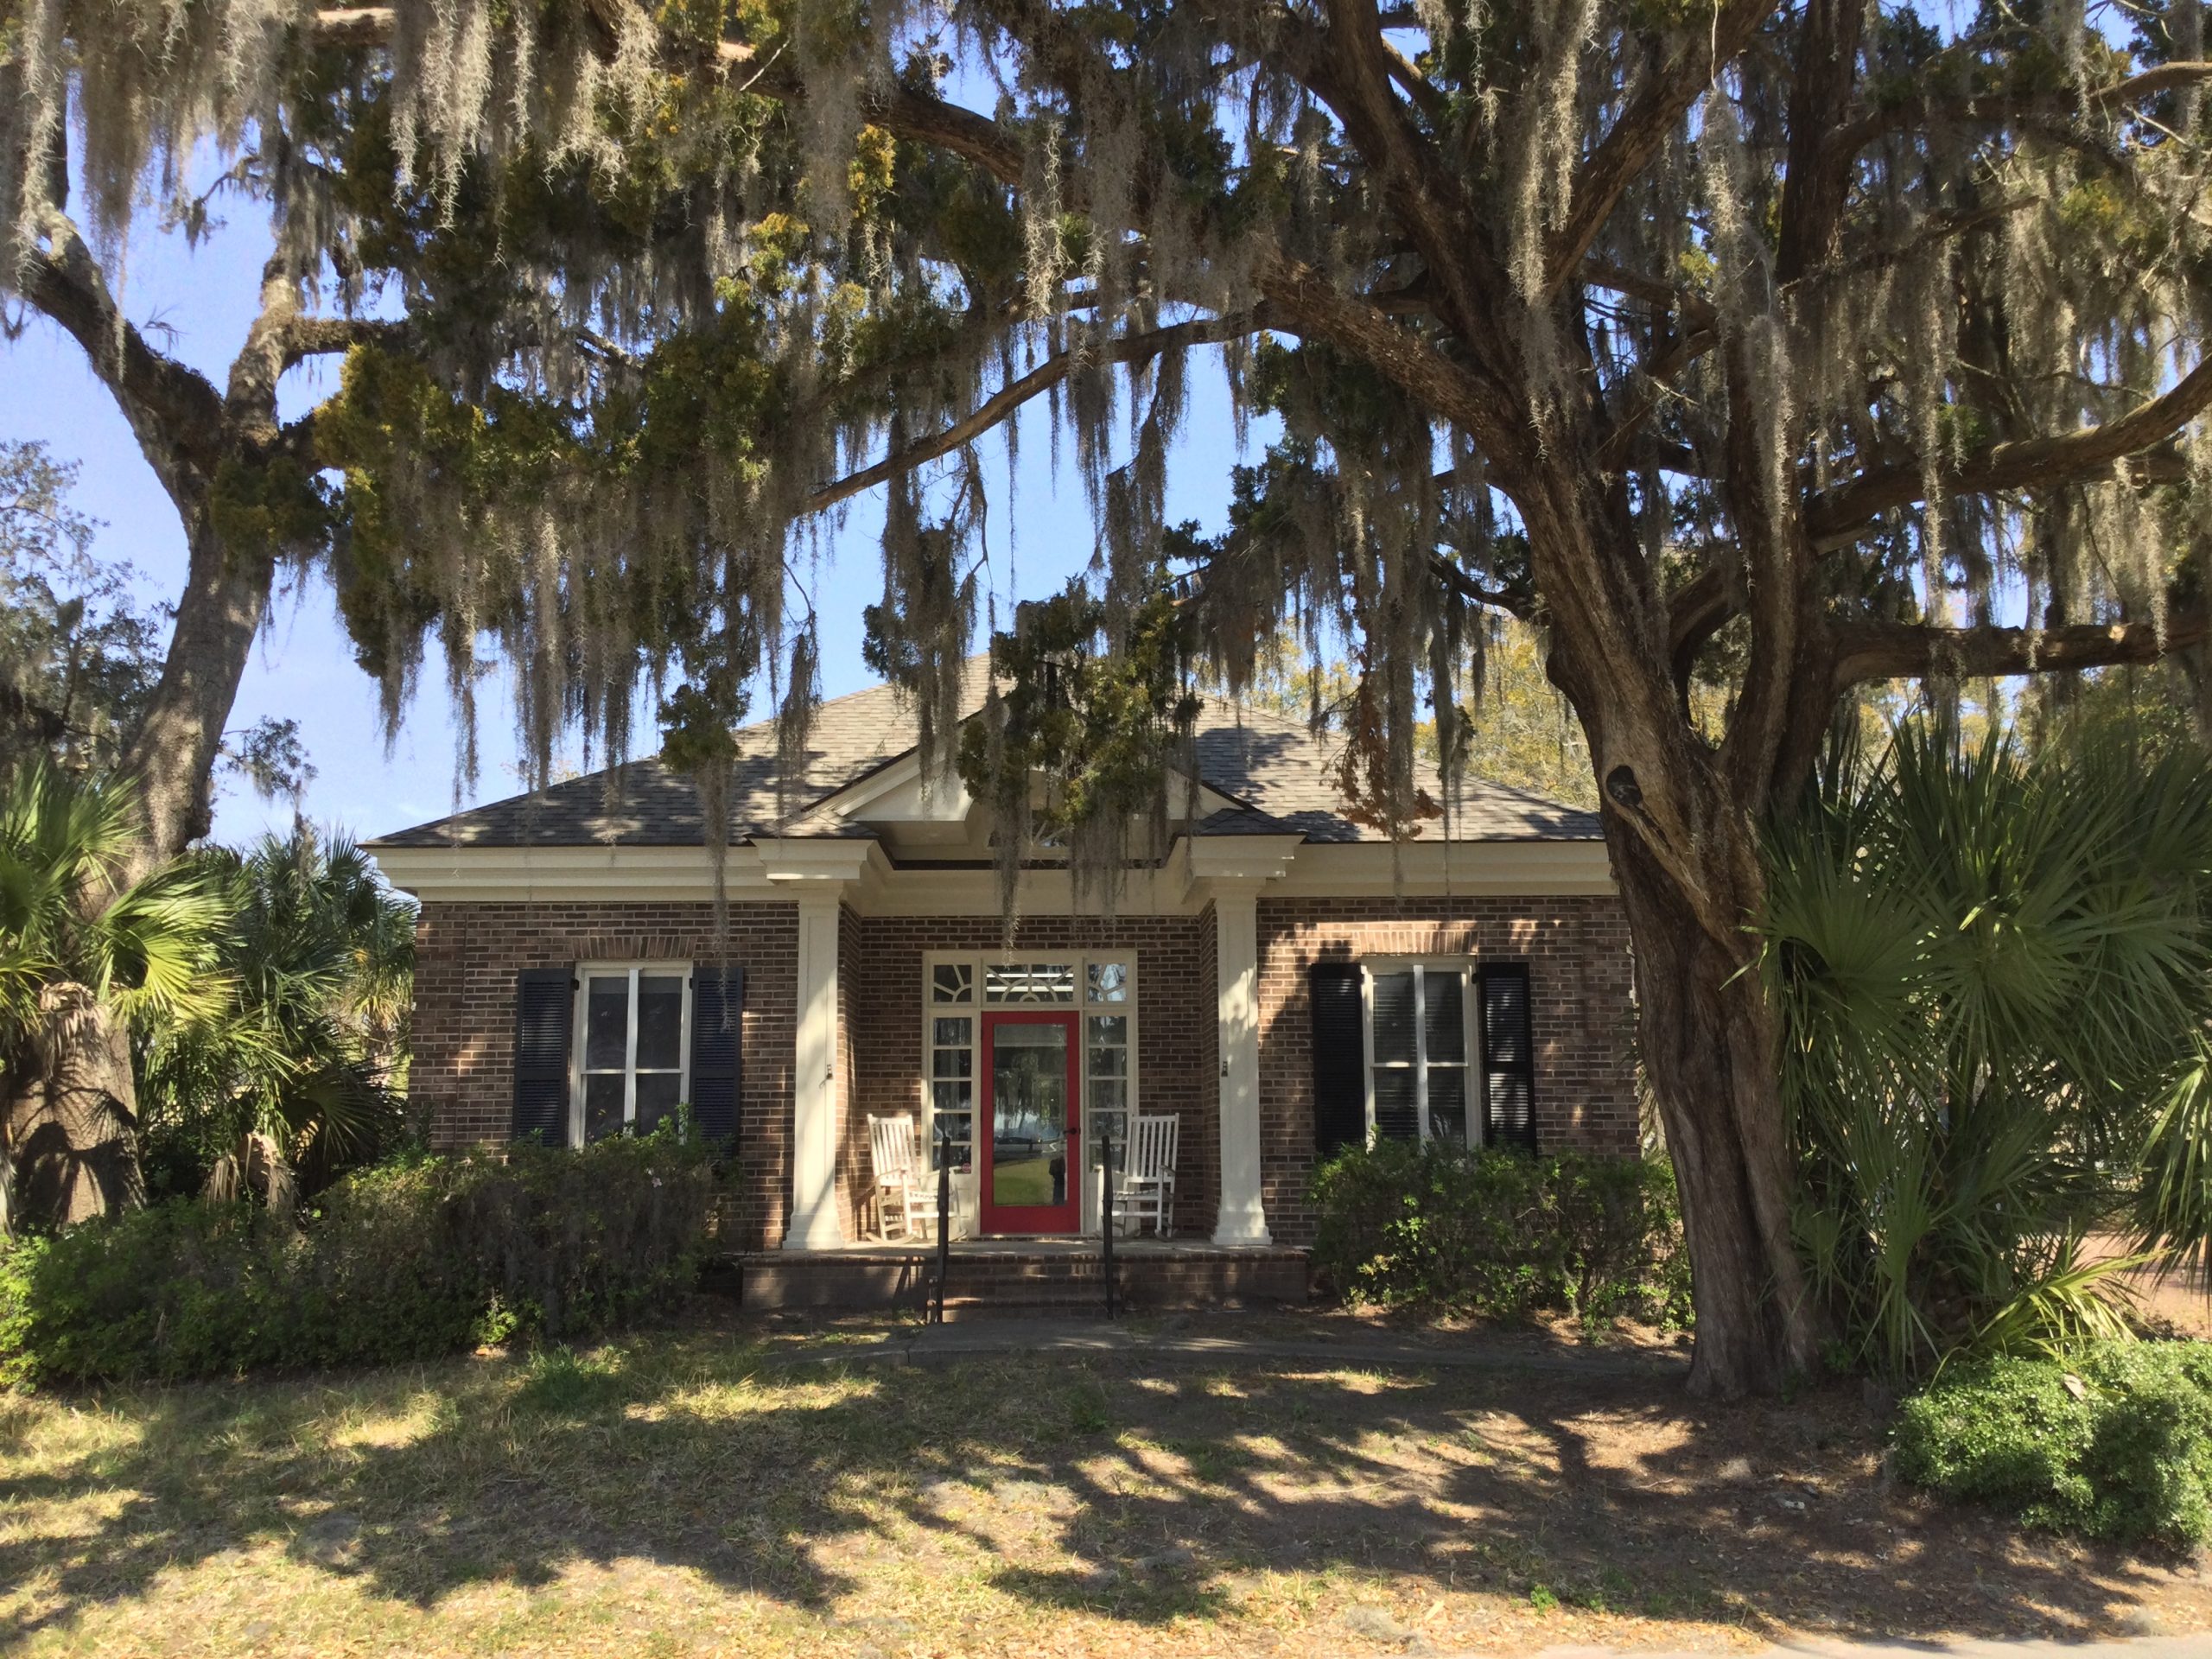 The Pat Conroy Literary Center in Beaufort, South Carolina